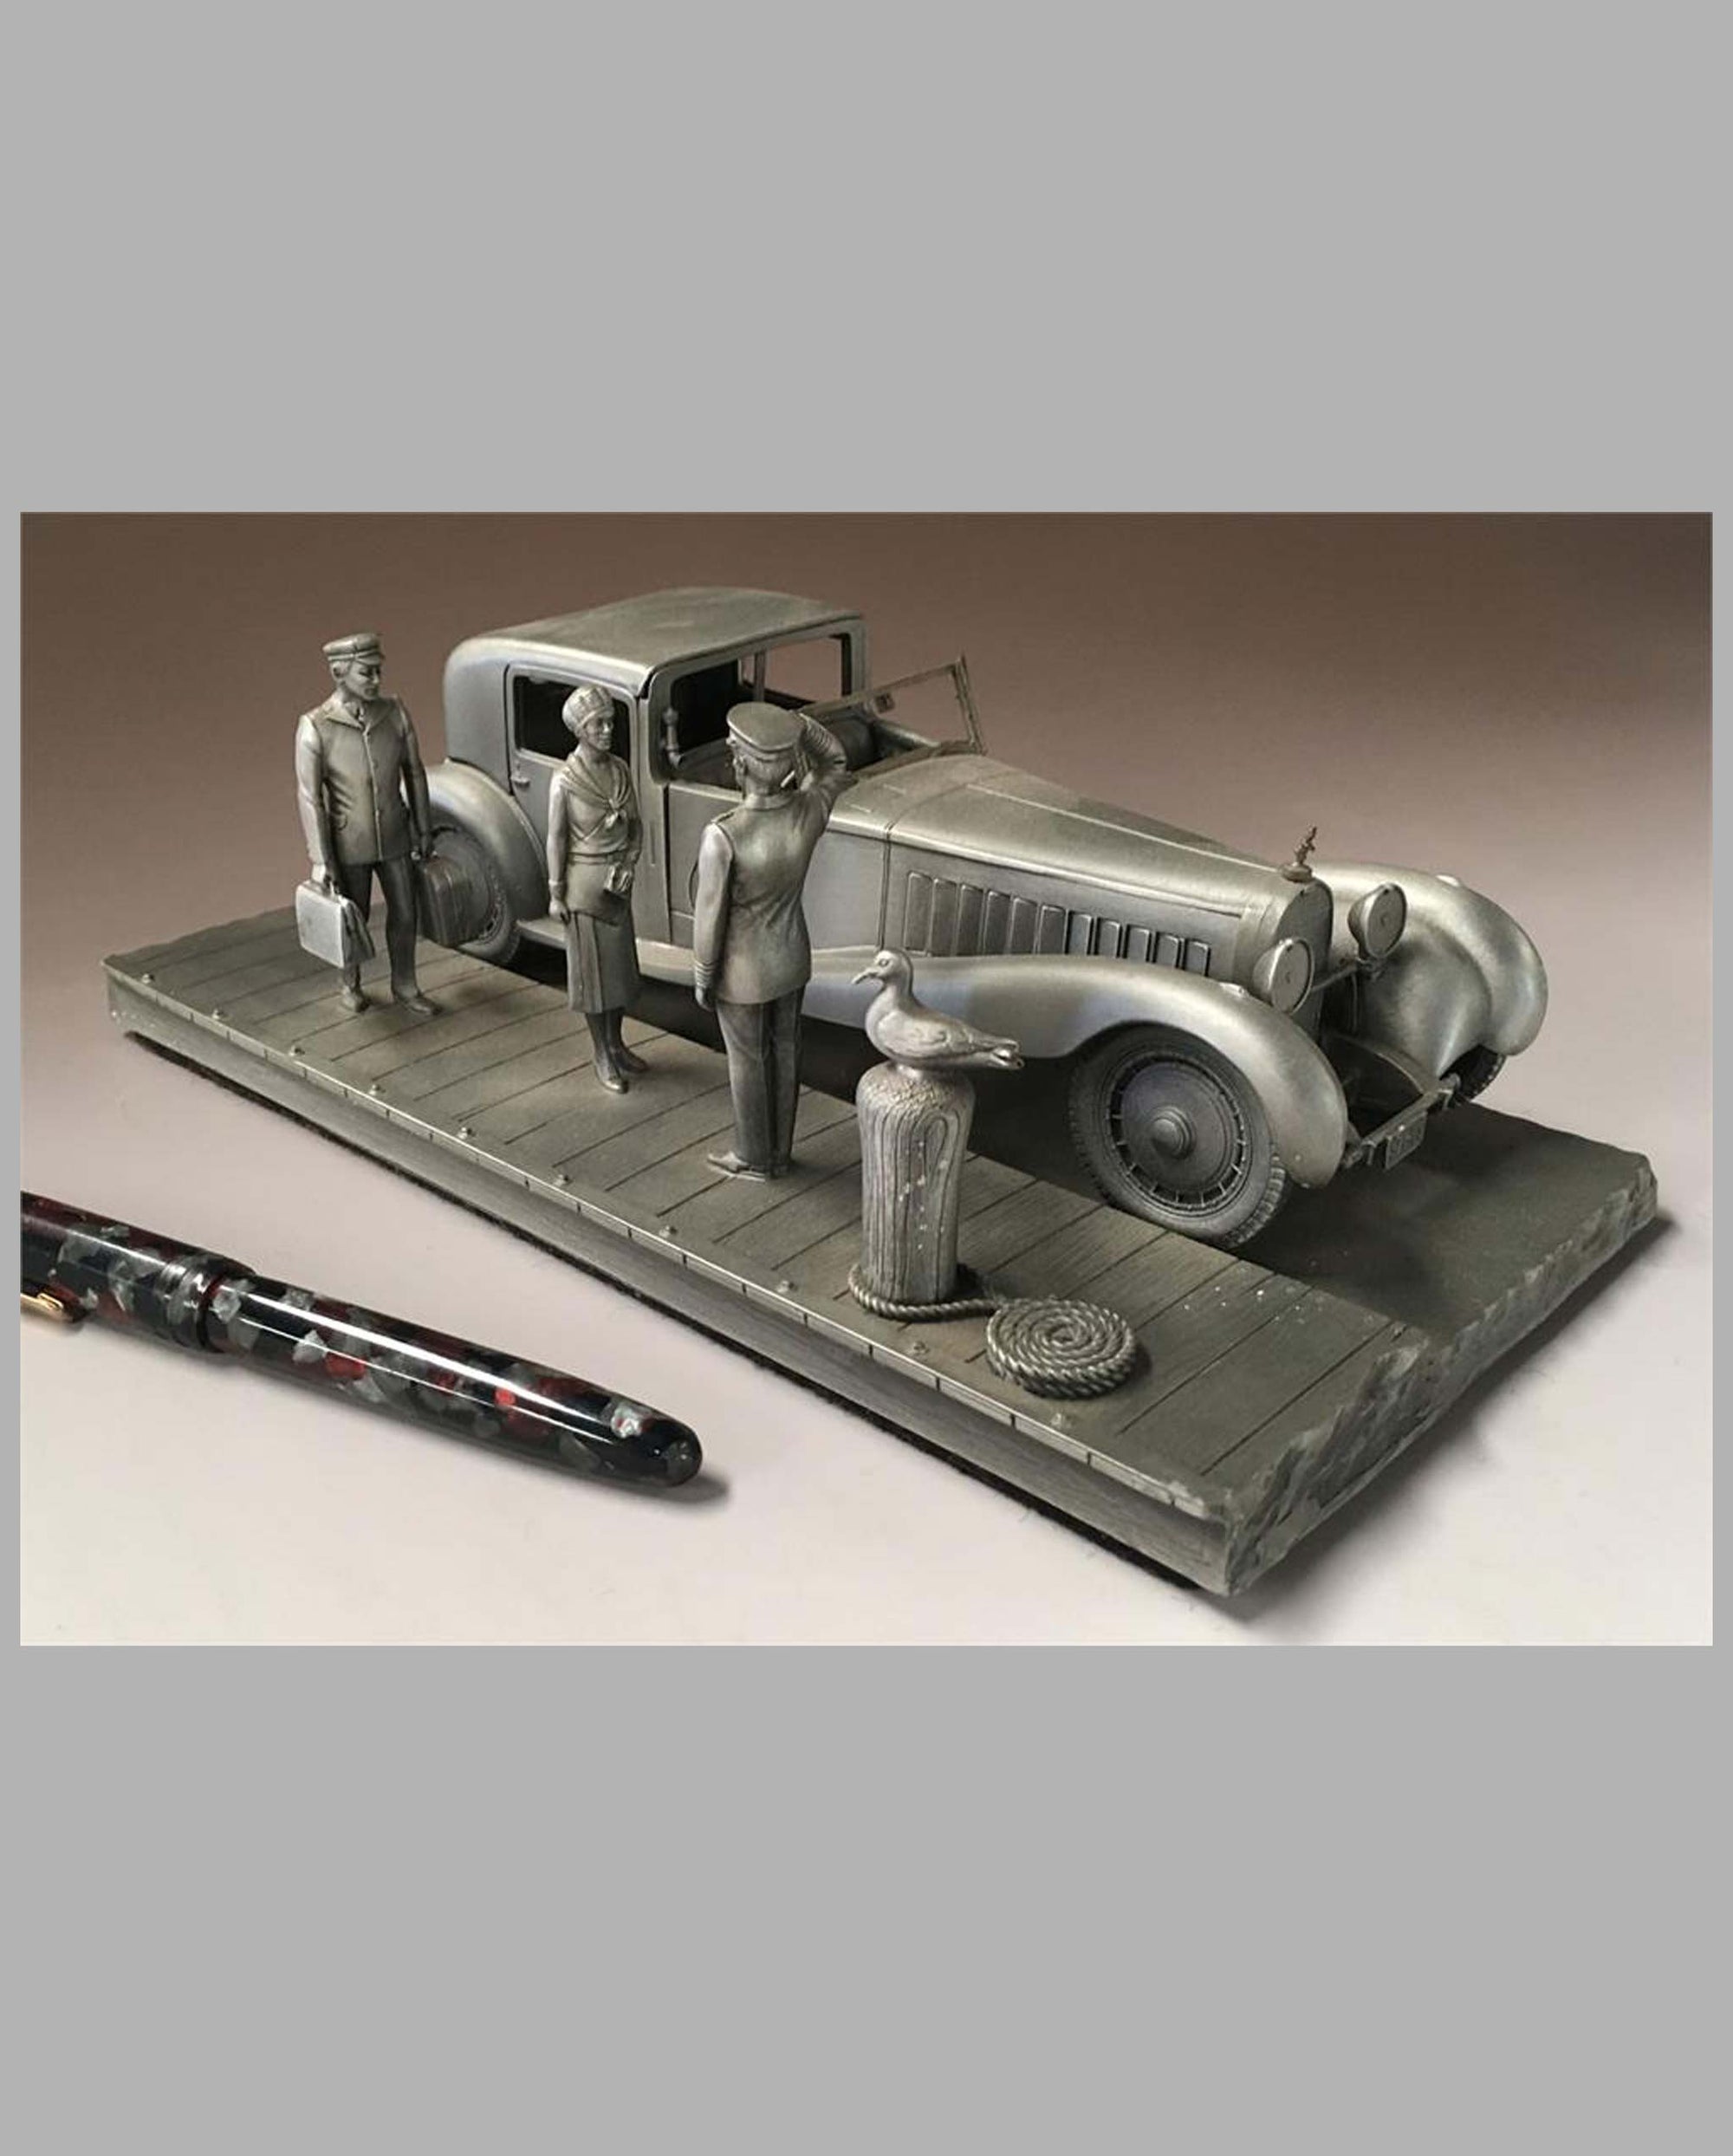 The Bugatti Royale Pewter Sculpture by Raymond Meyers